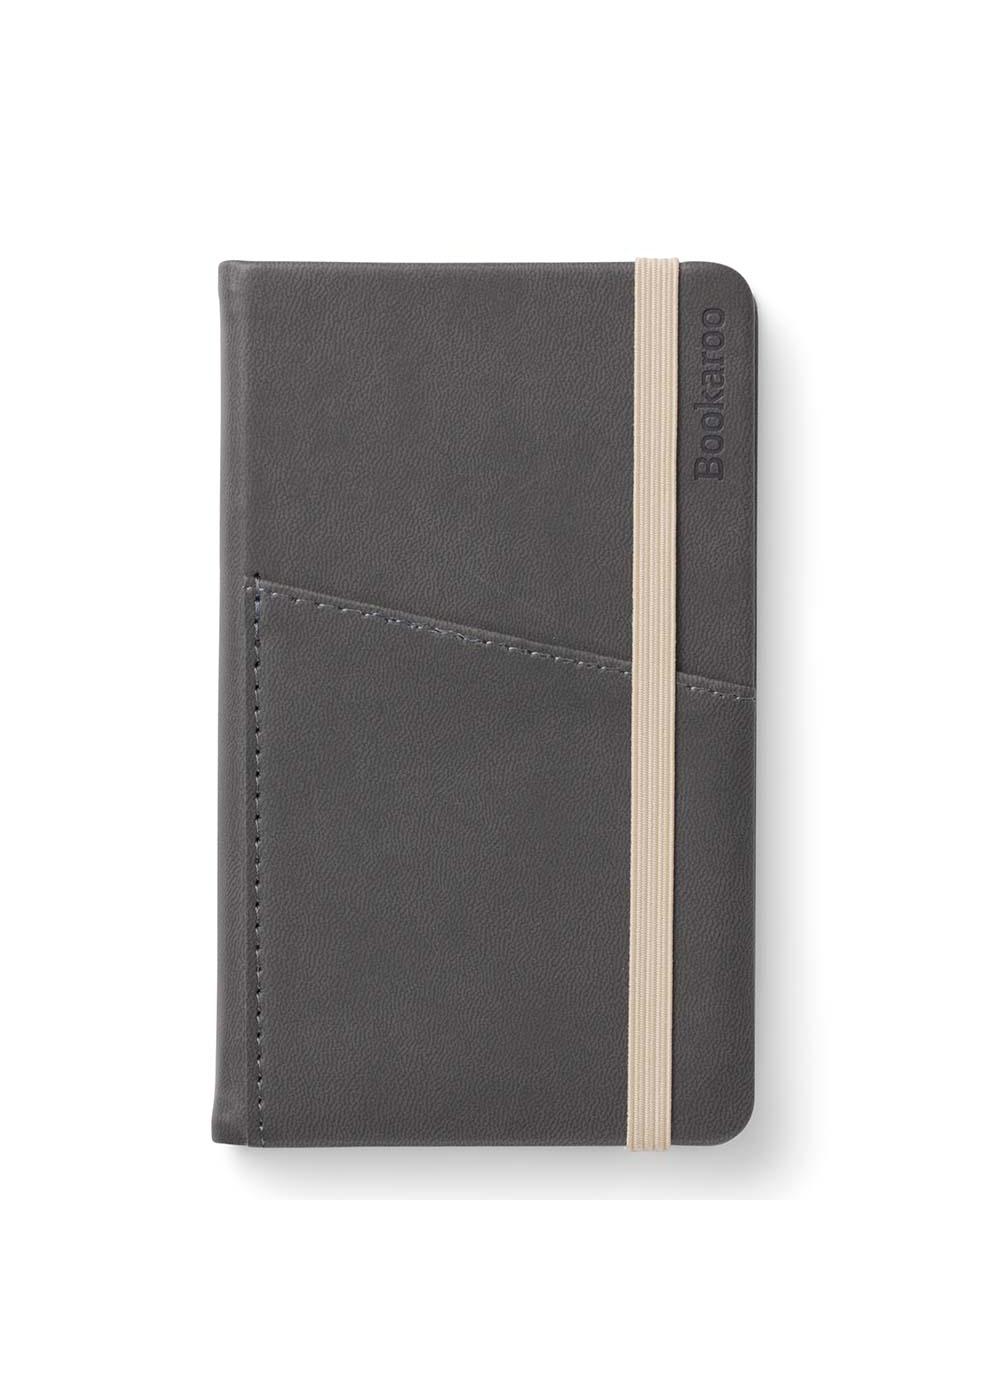 Bookaroo A6 Pocket Notebook - Charcoal; image 2 of 2